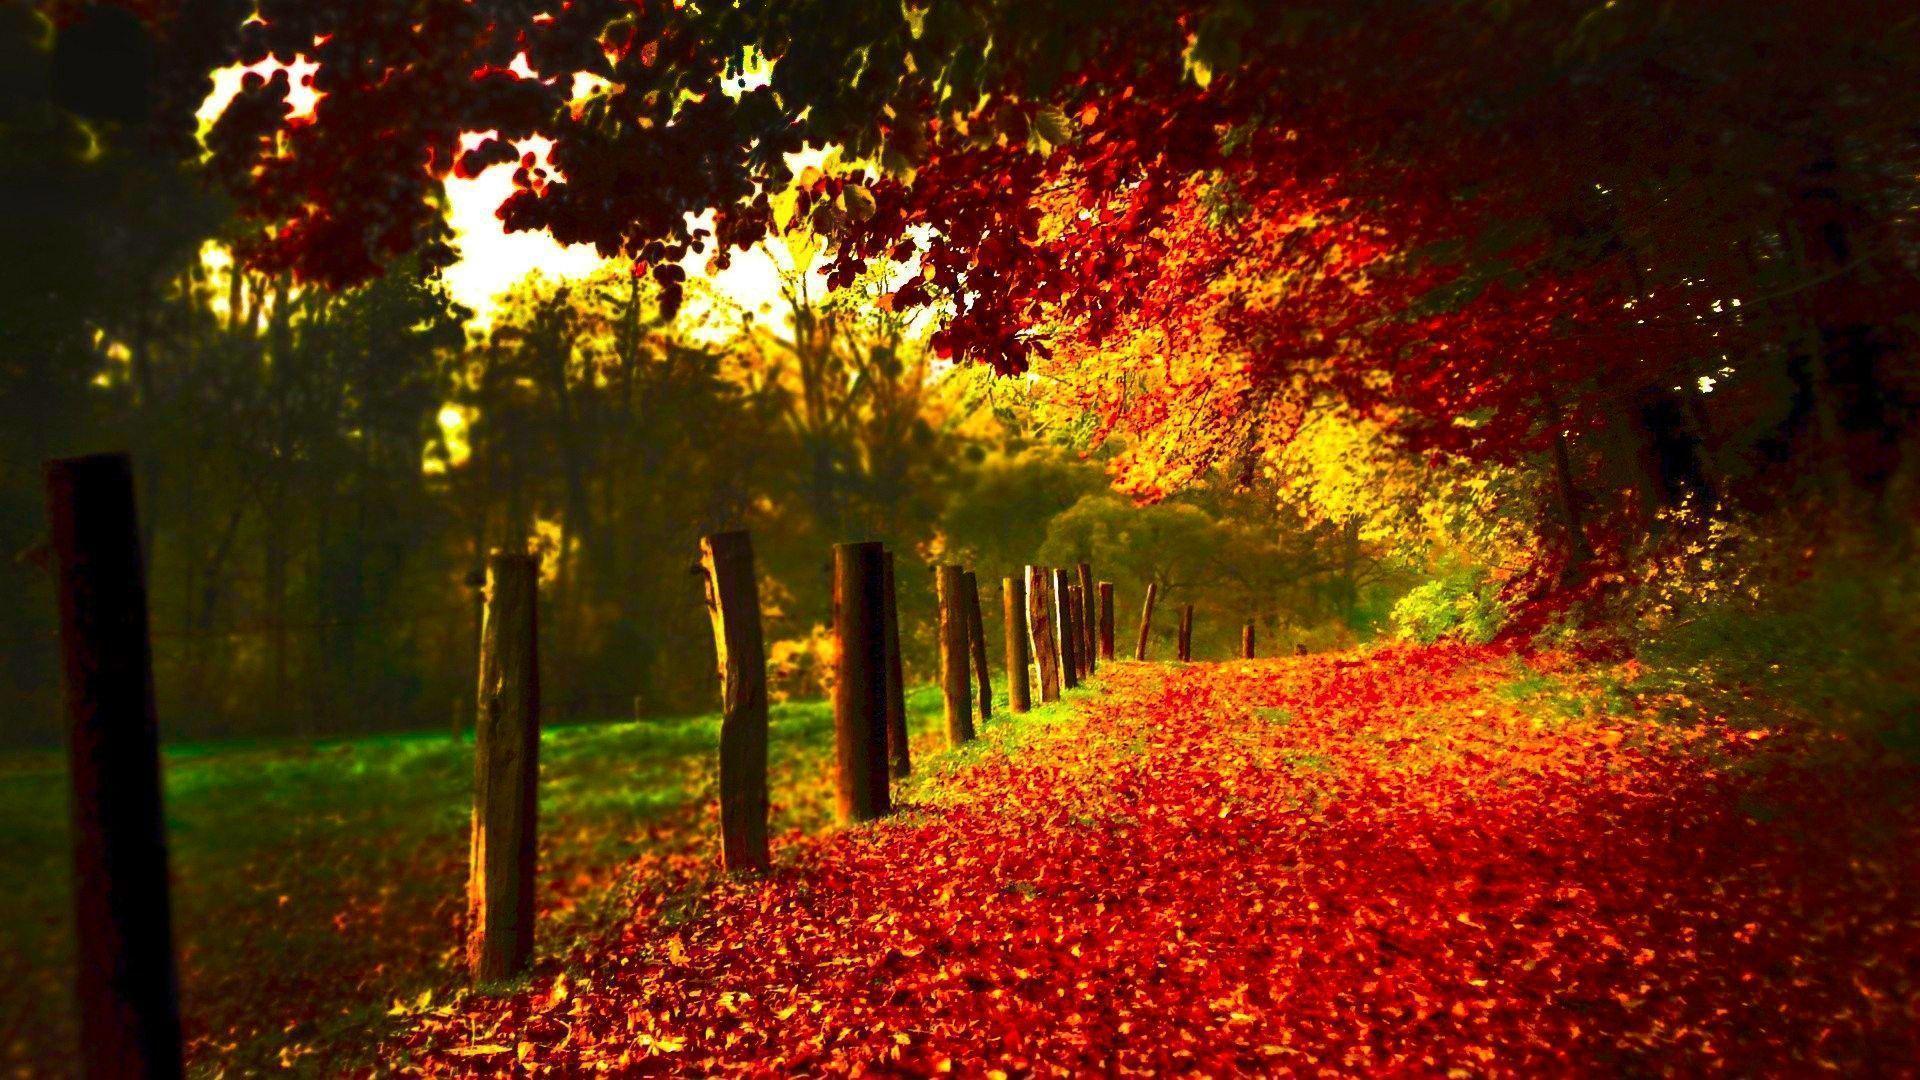 Red Fall Leaves Wallpaper Image & Picture